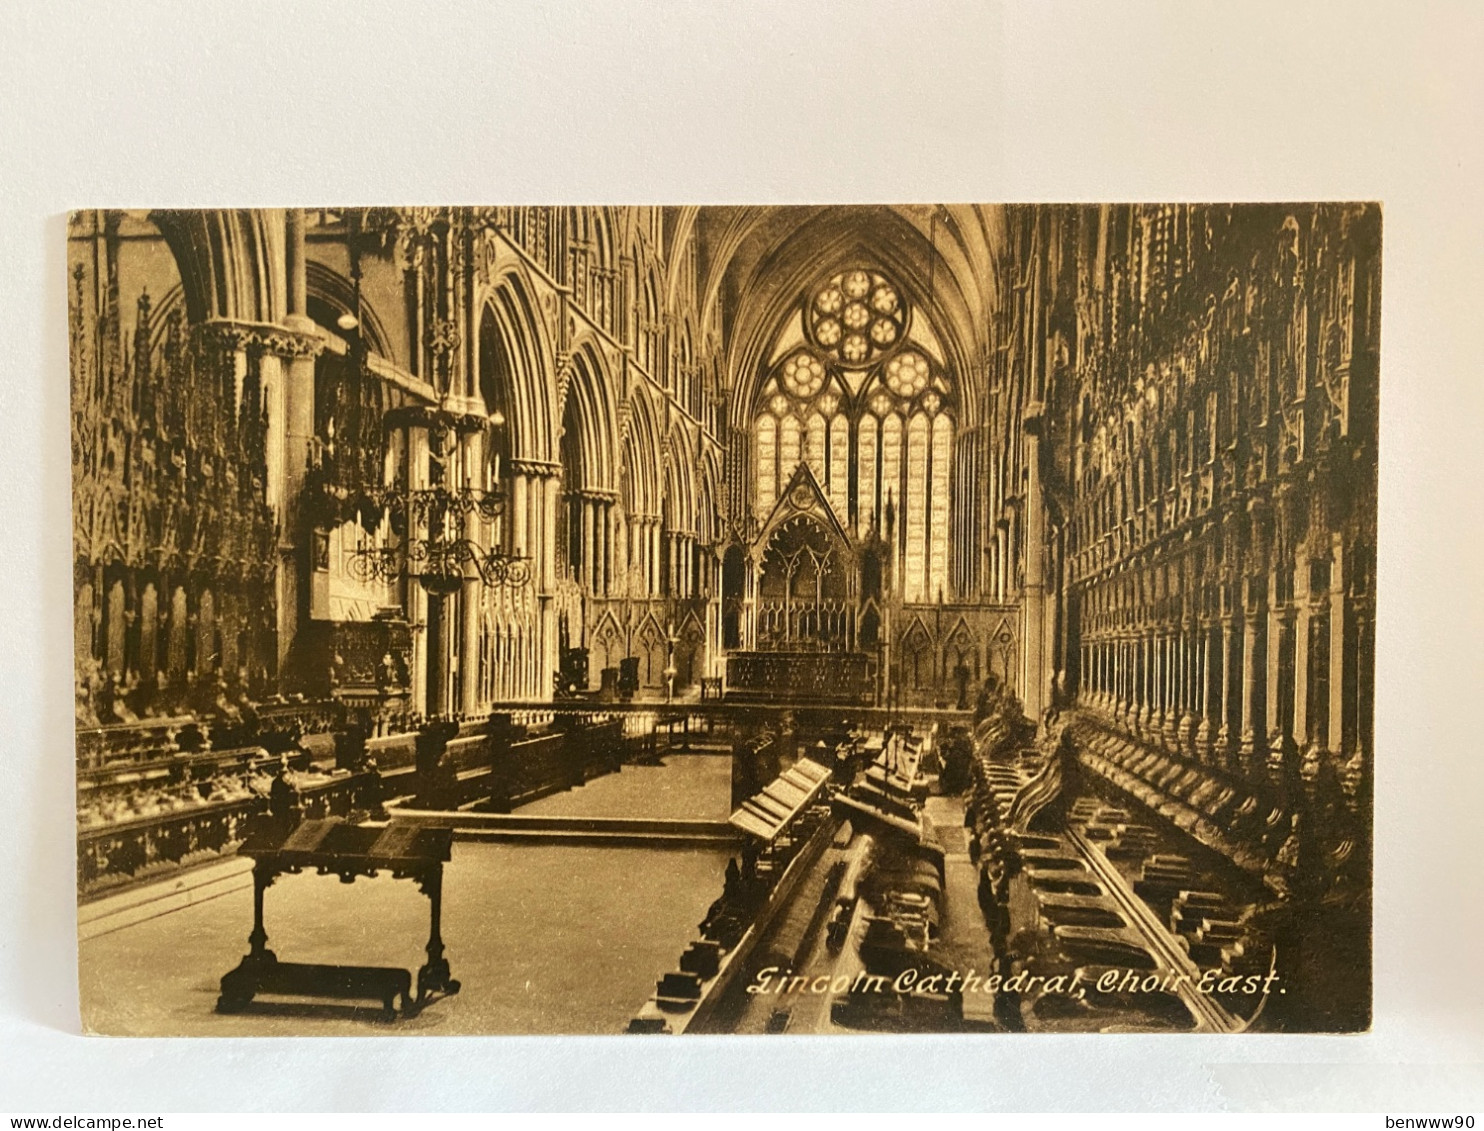 Lincoln Cathedral Choir East Postcard - Lincoln